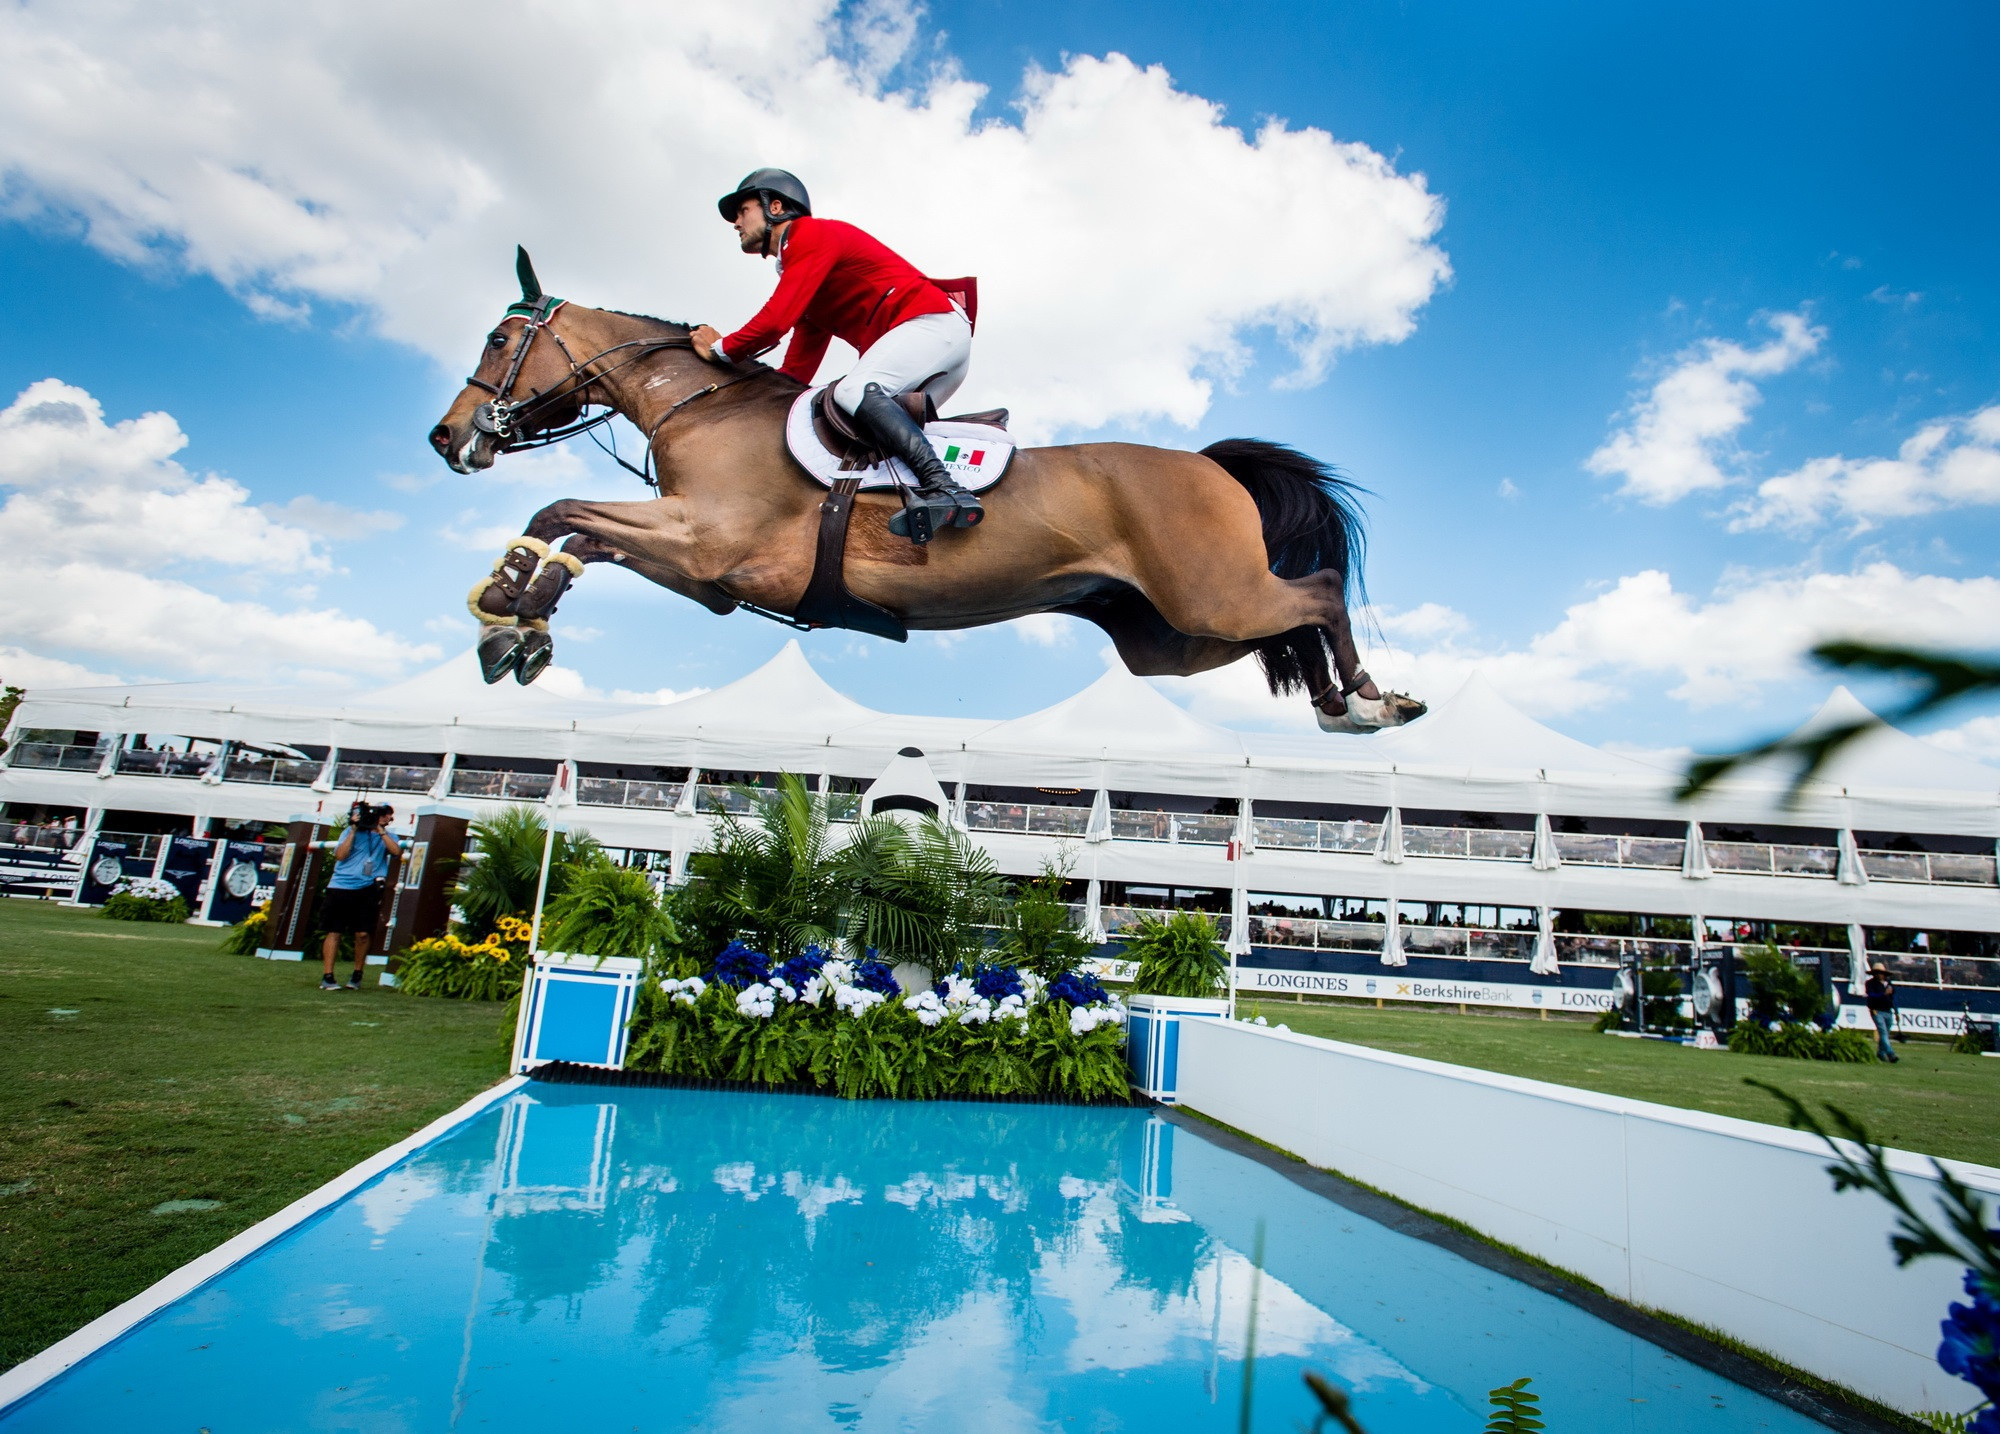 Mexico won the opening event of the FEI Jumping Nations Cup in Wellington in Florida ©FEI